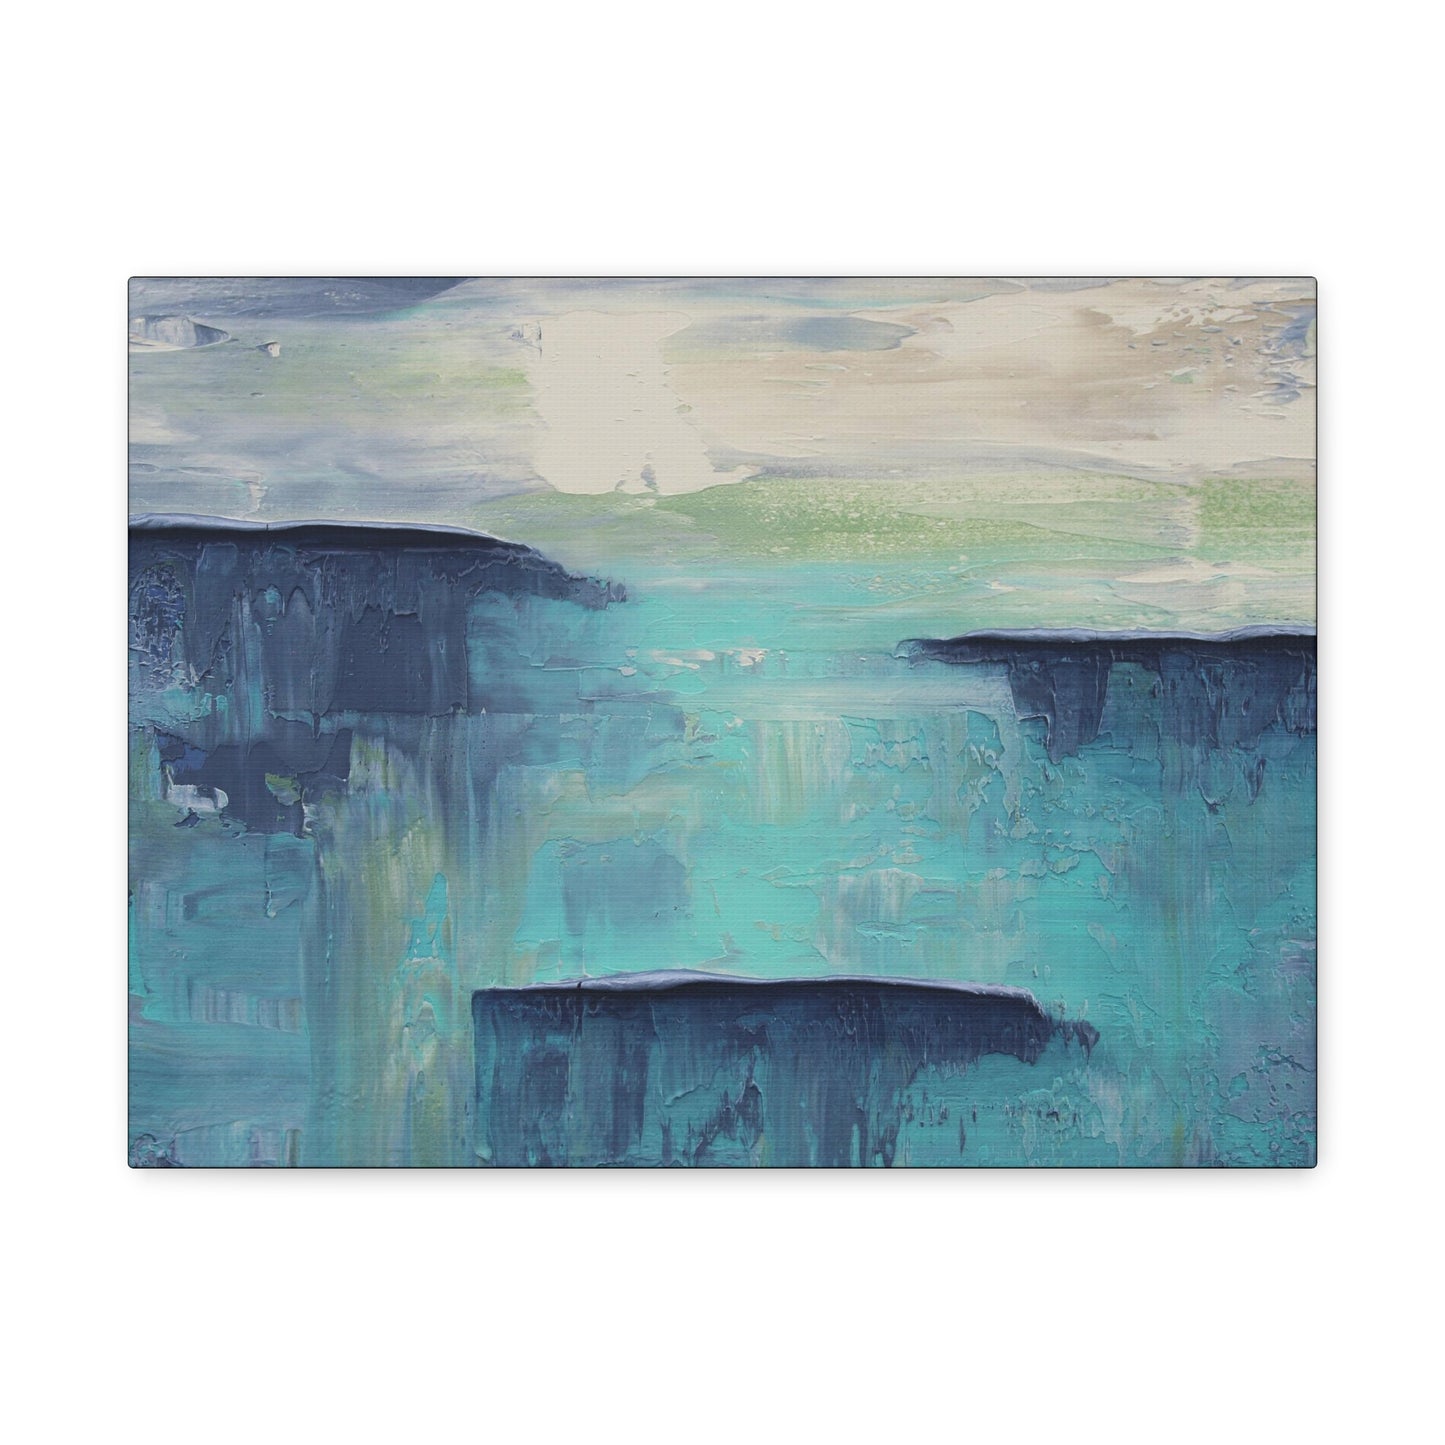 Leaving Space - Unframed Gallery Wrapped Canvas